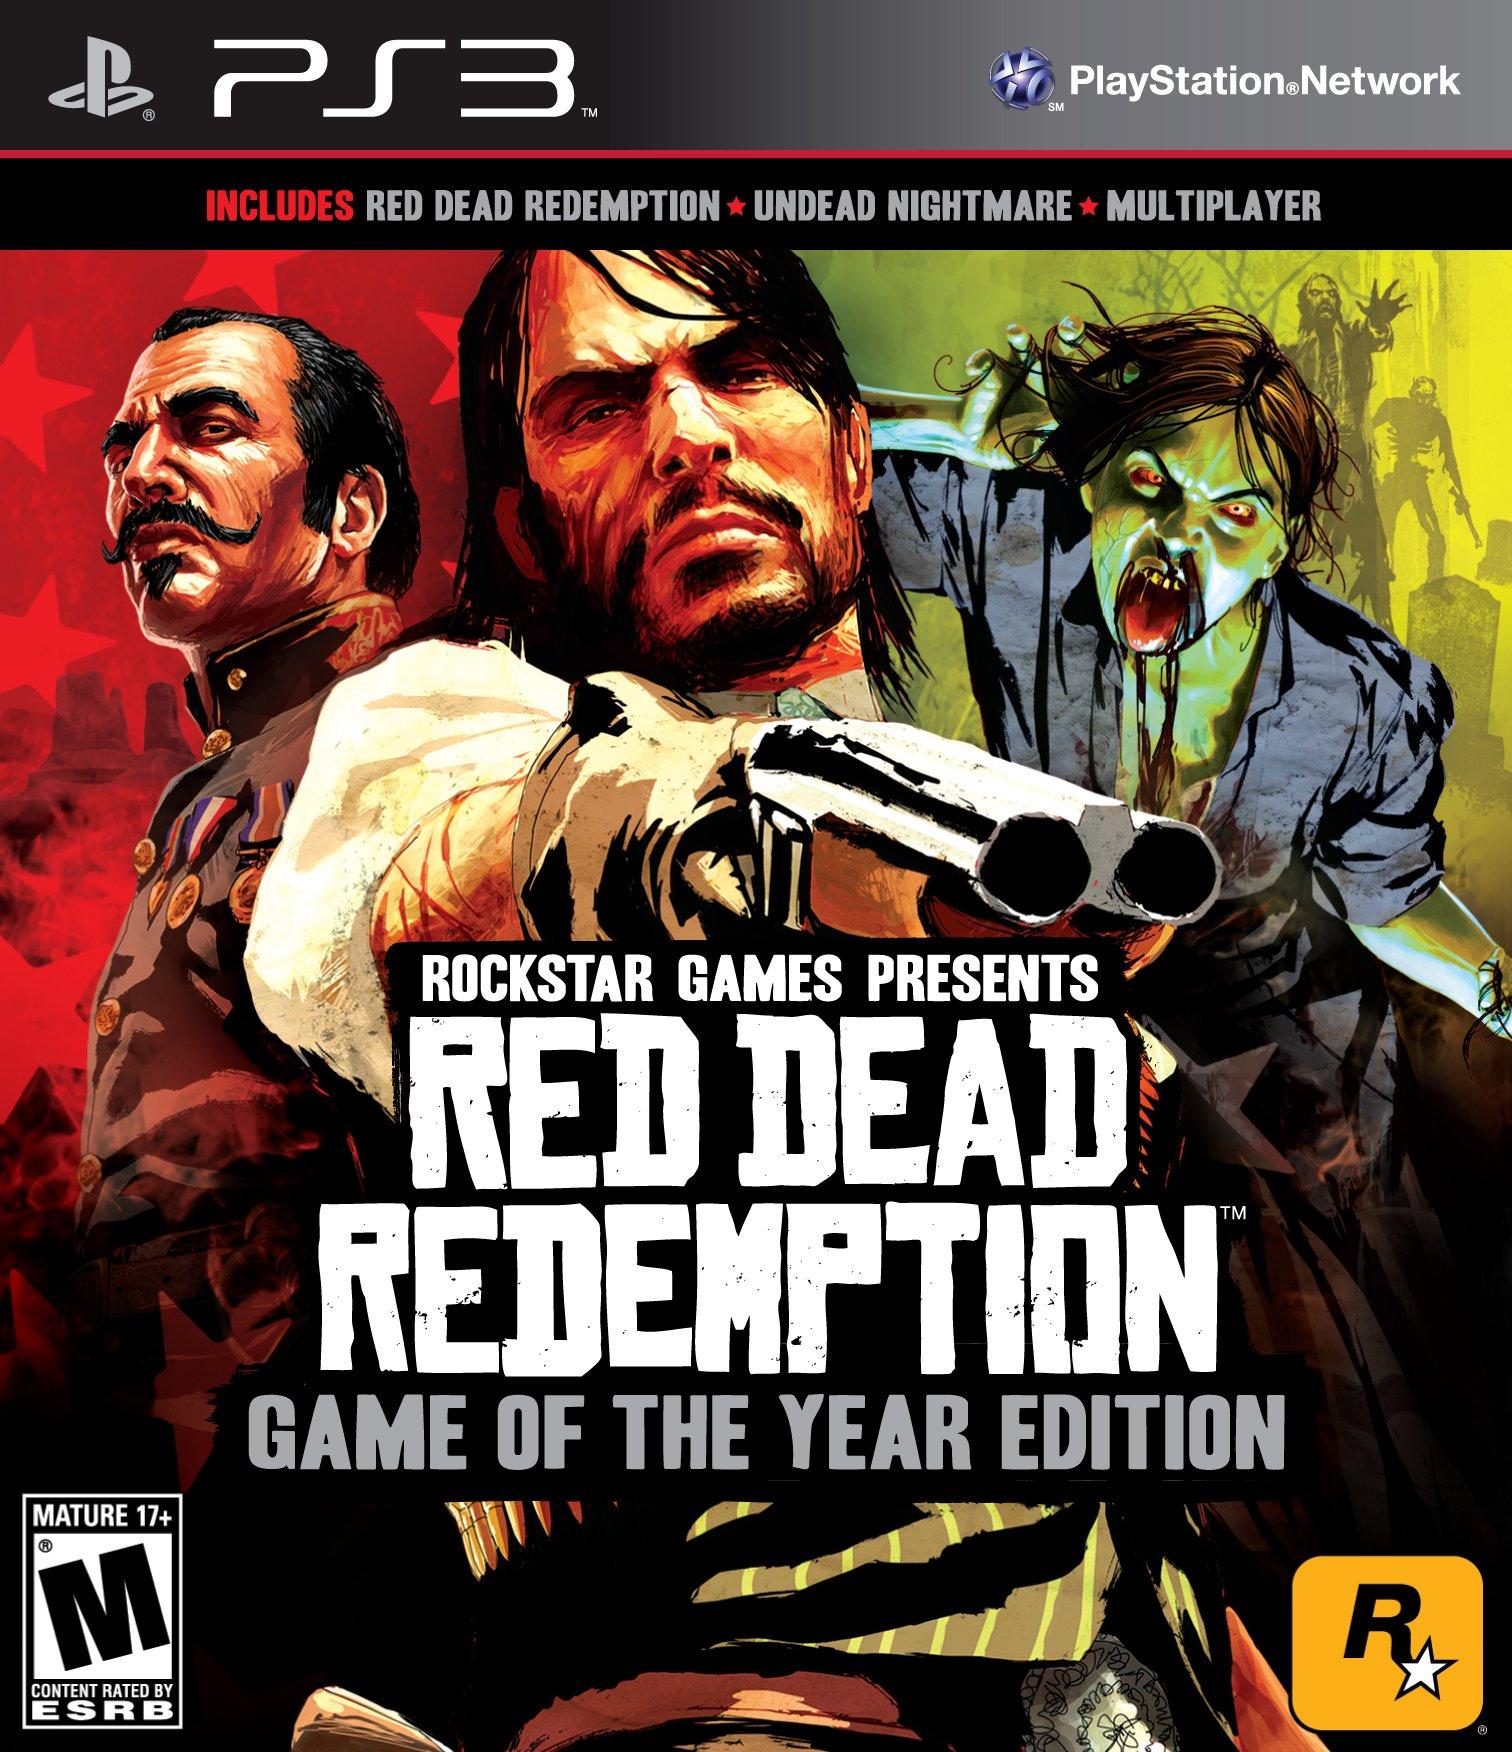 appeal Personification mercenary Red Dead Redemption - PlayStation 3